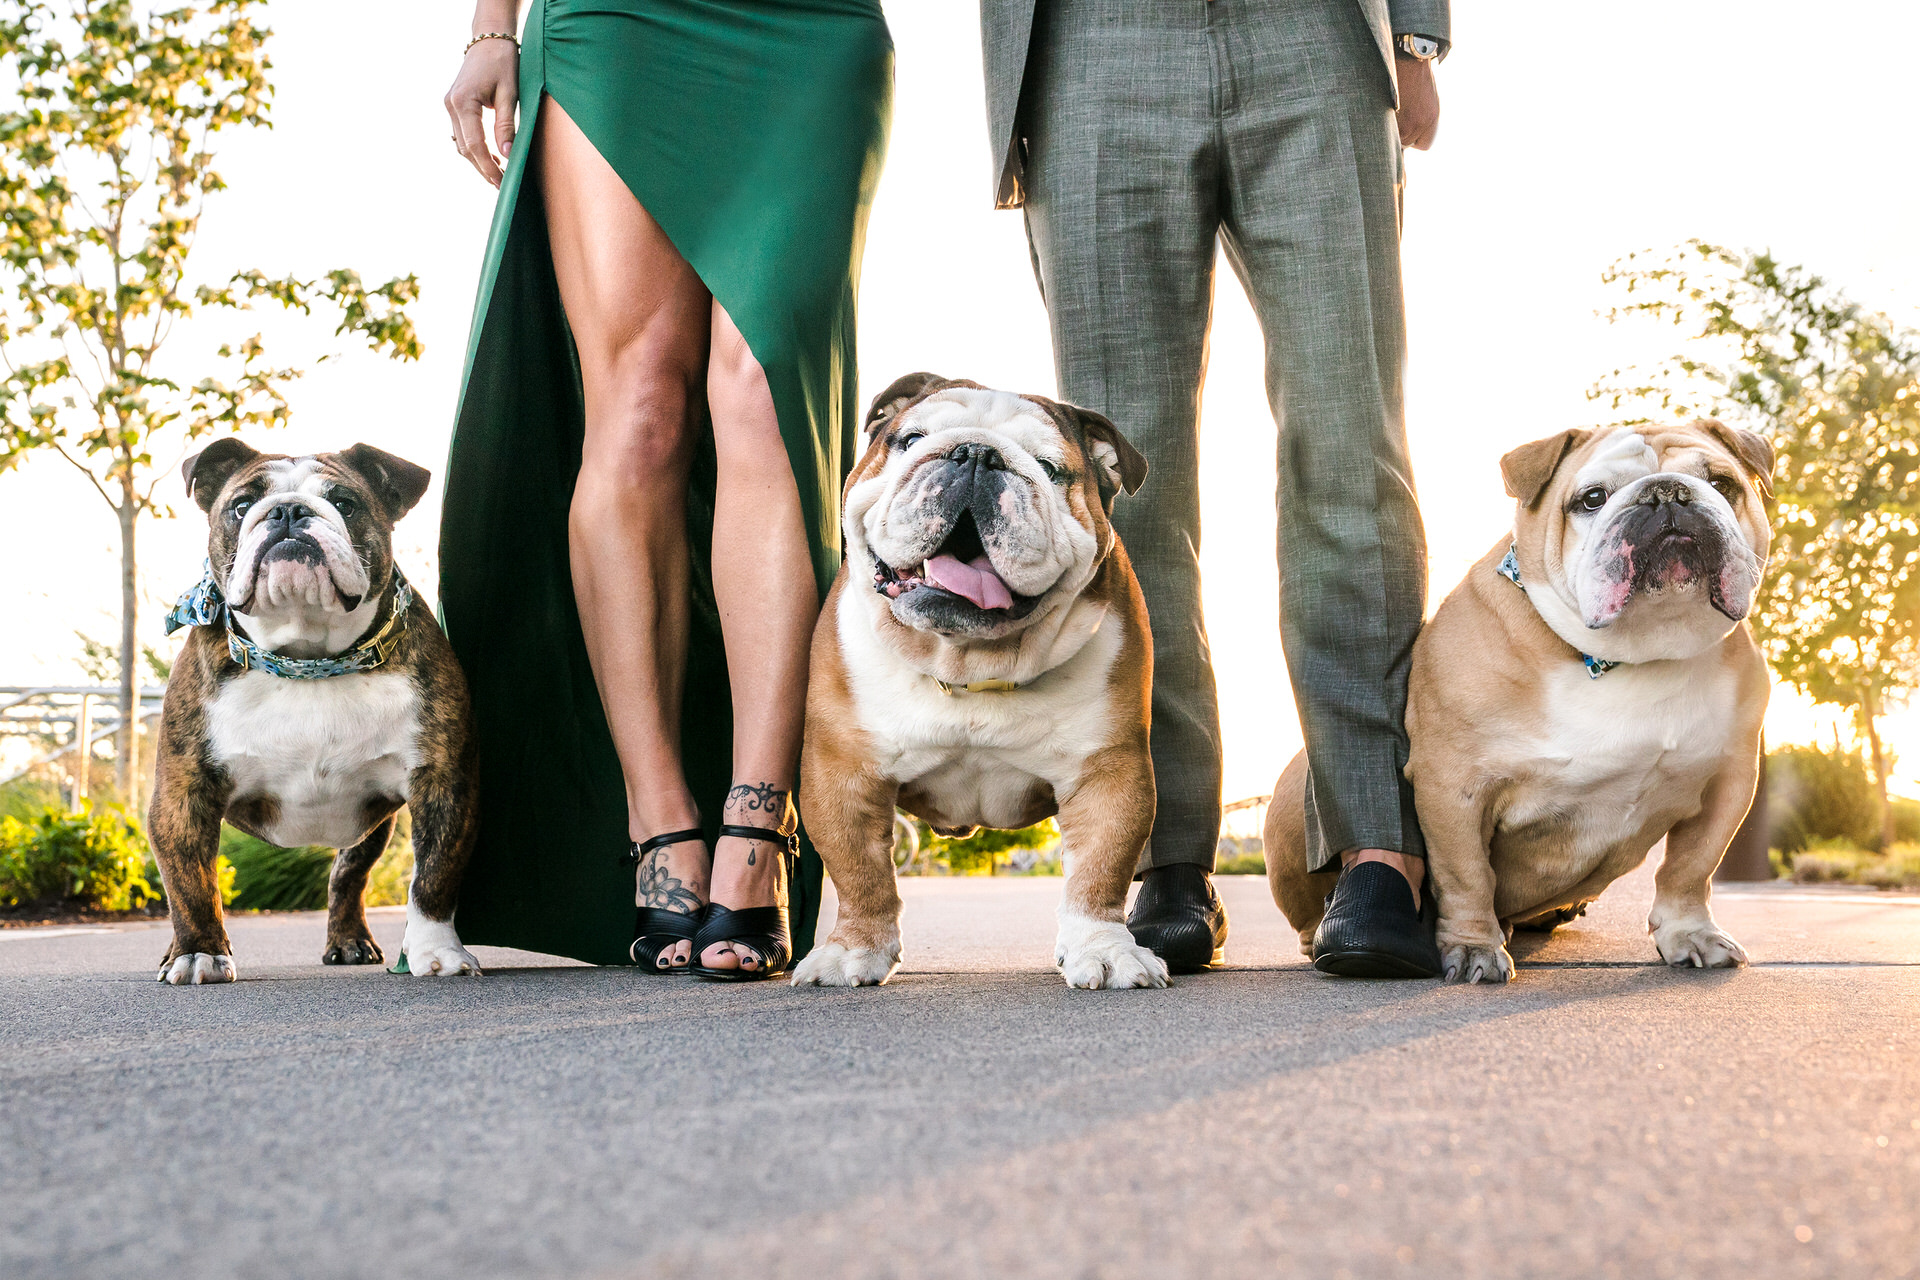 Three bulldogs sit at their owner's feet